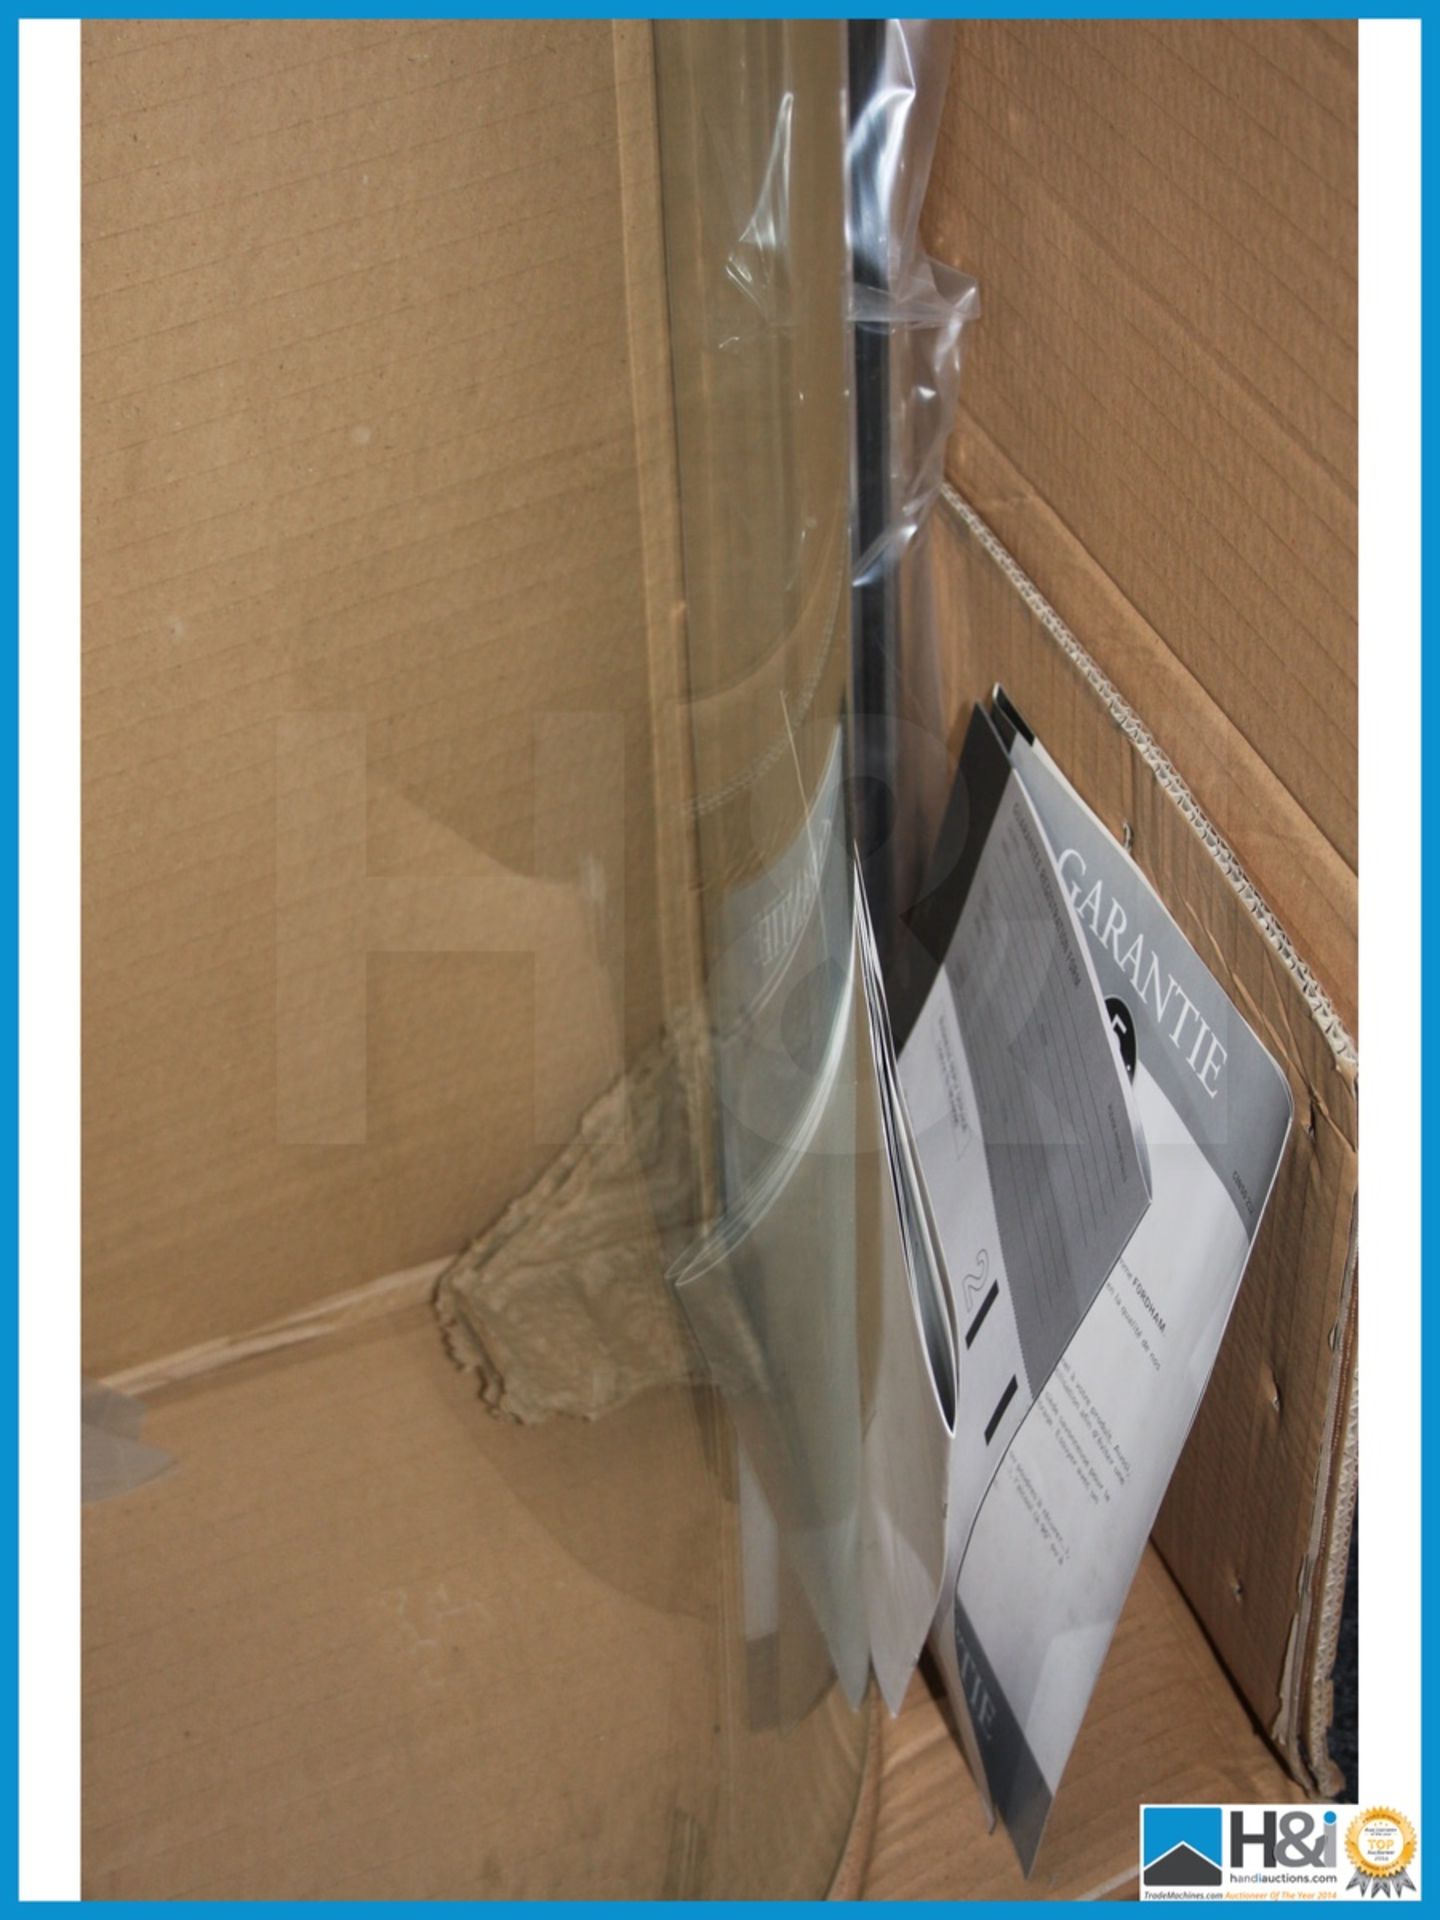 Niagra frameless walk in shower screen 1400 x 900 new and boxed . Appraisal: Viewing Essential - Image 4 of 6